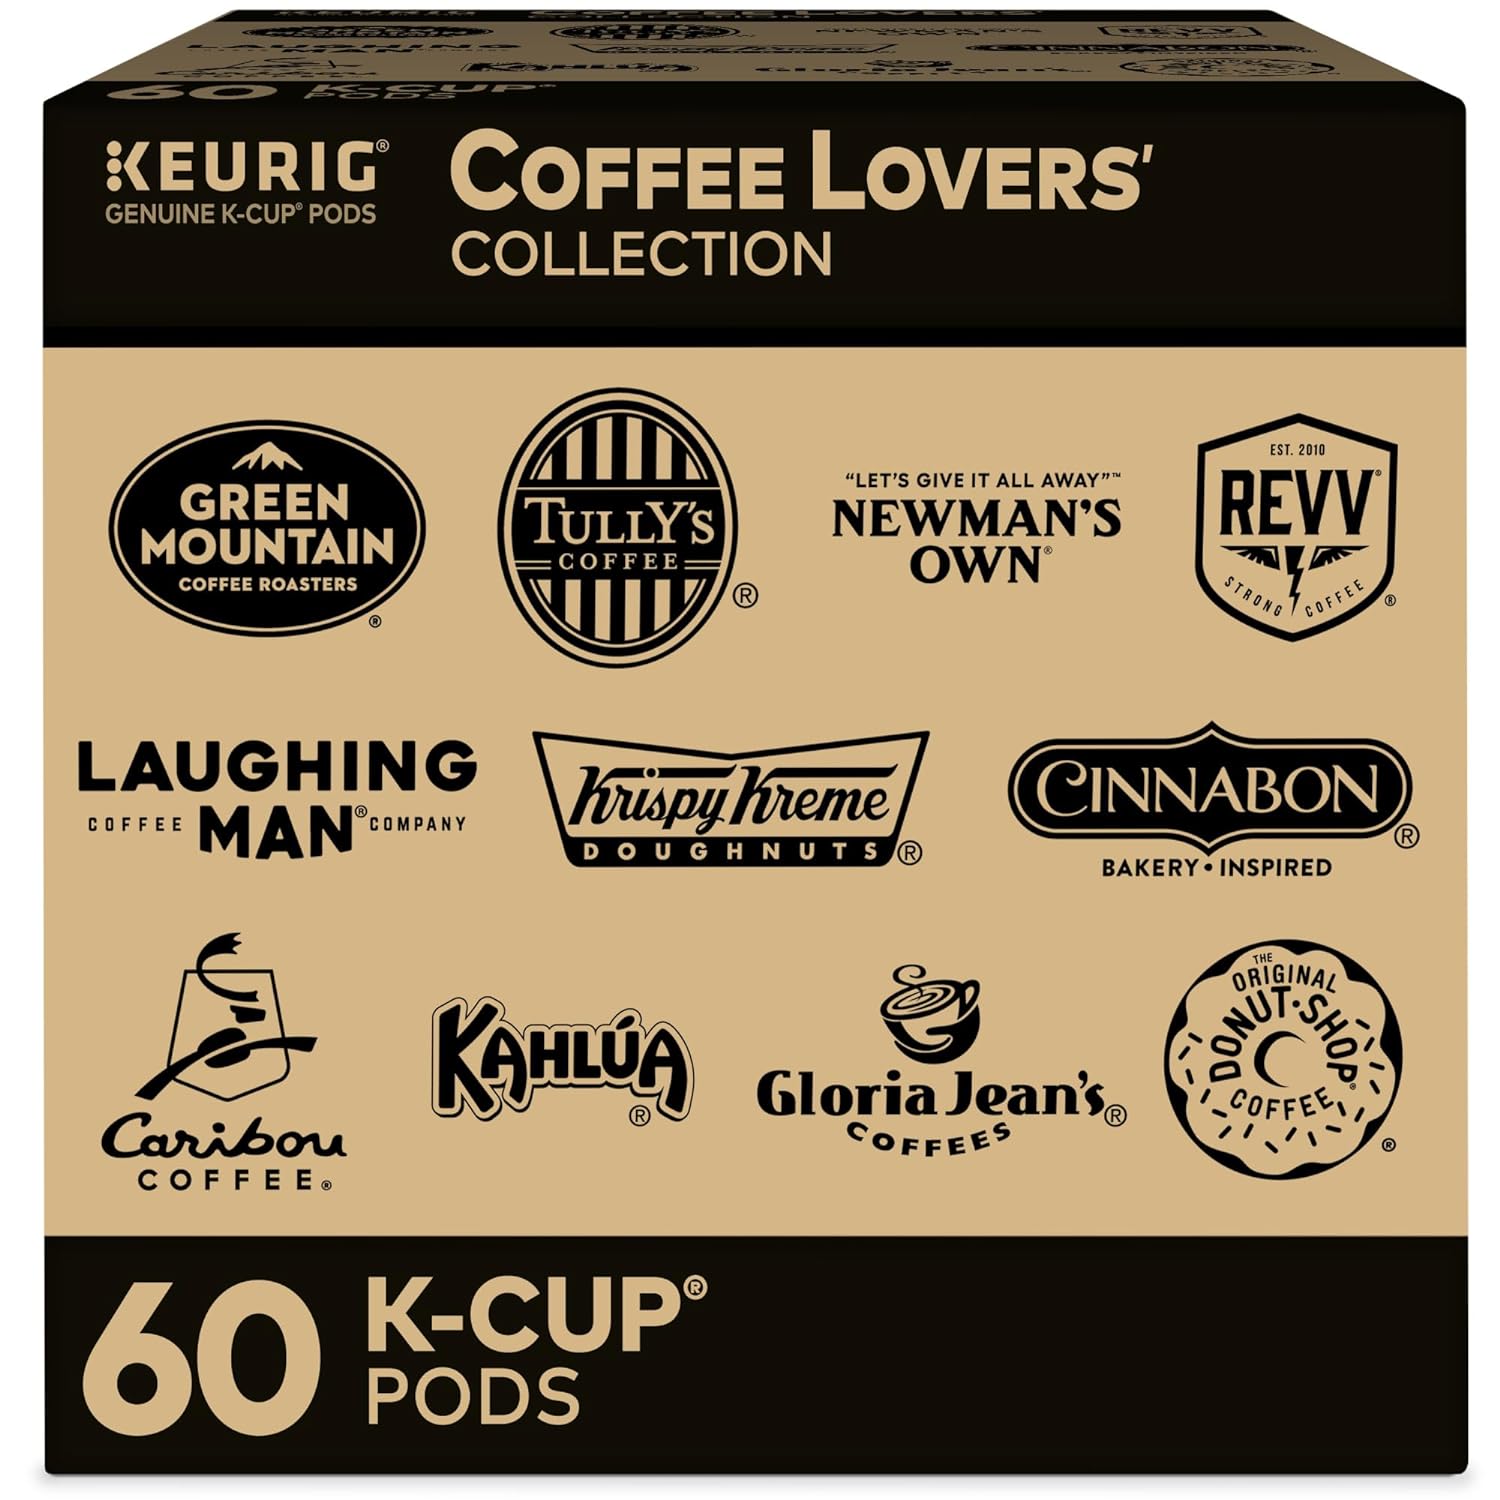 Keurig Coffee Lovers’ Collection Variety Pack, Single-Serve Coffee K-Cup Pods Sampler, 60 Count